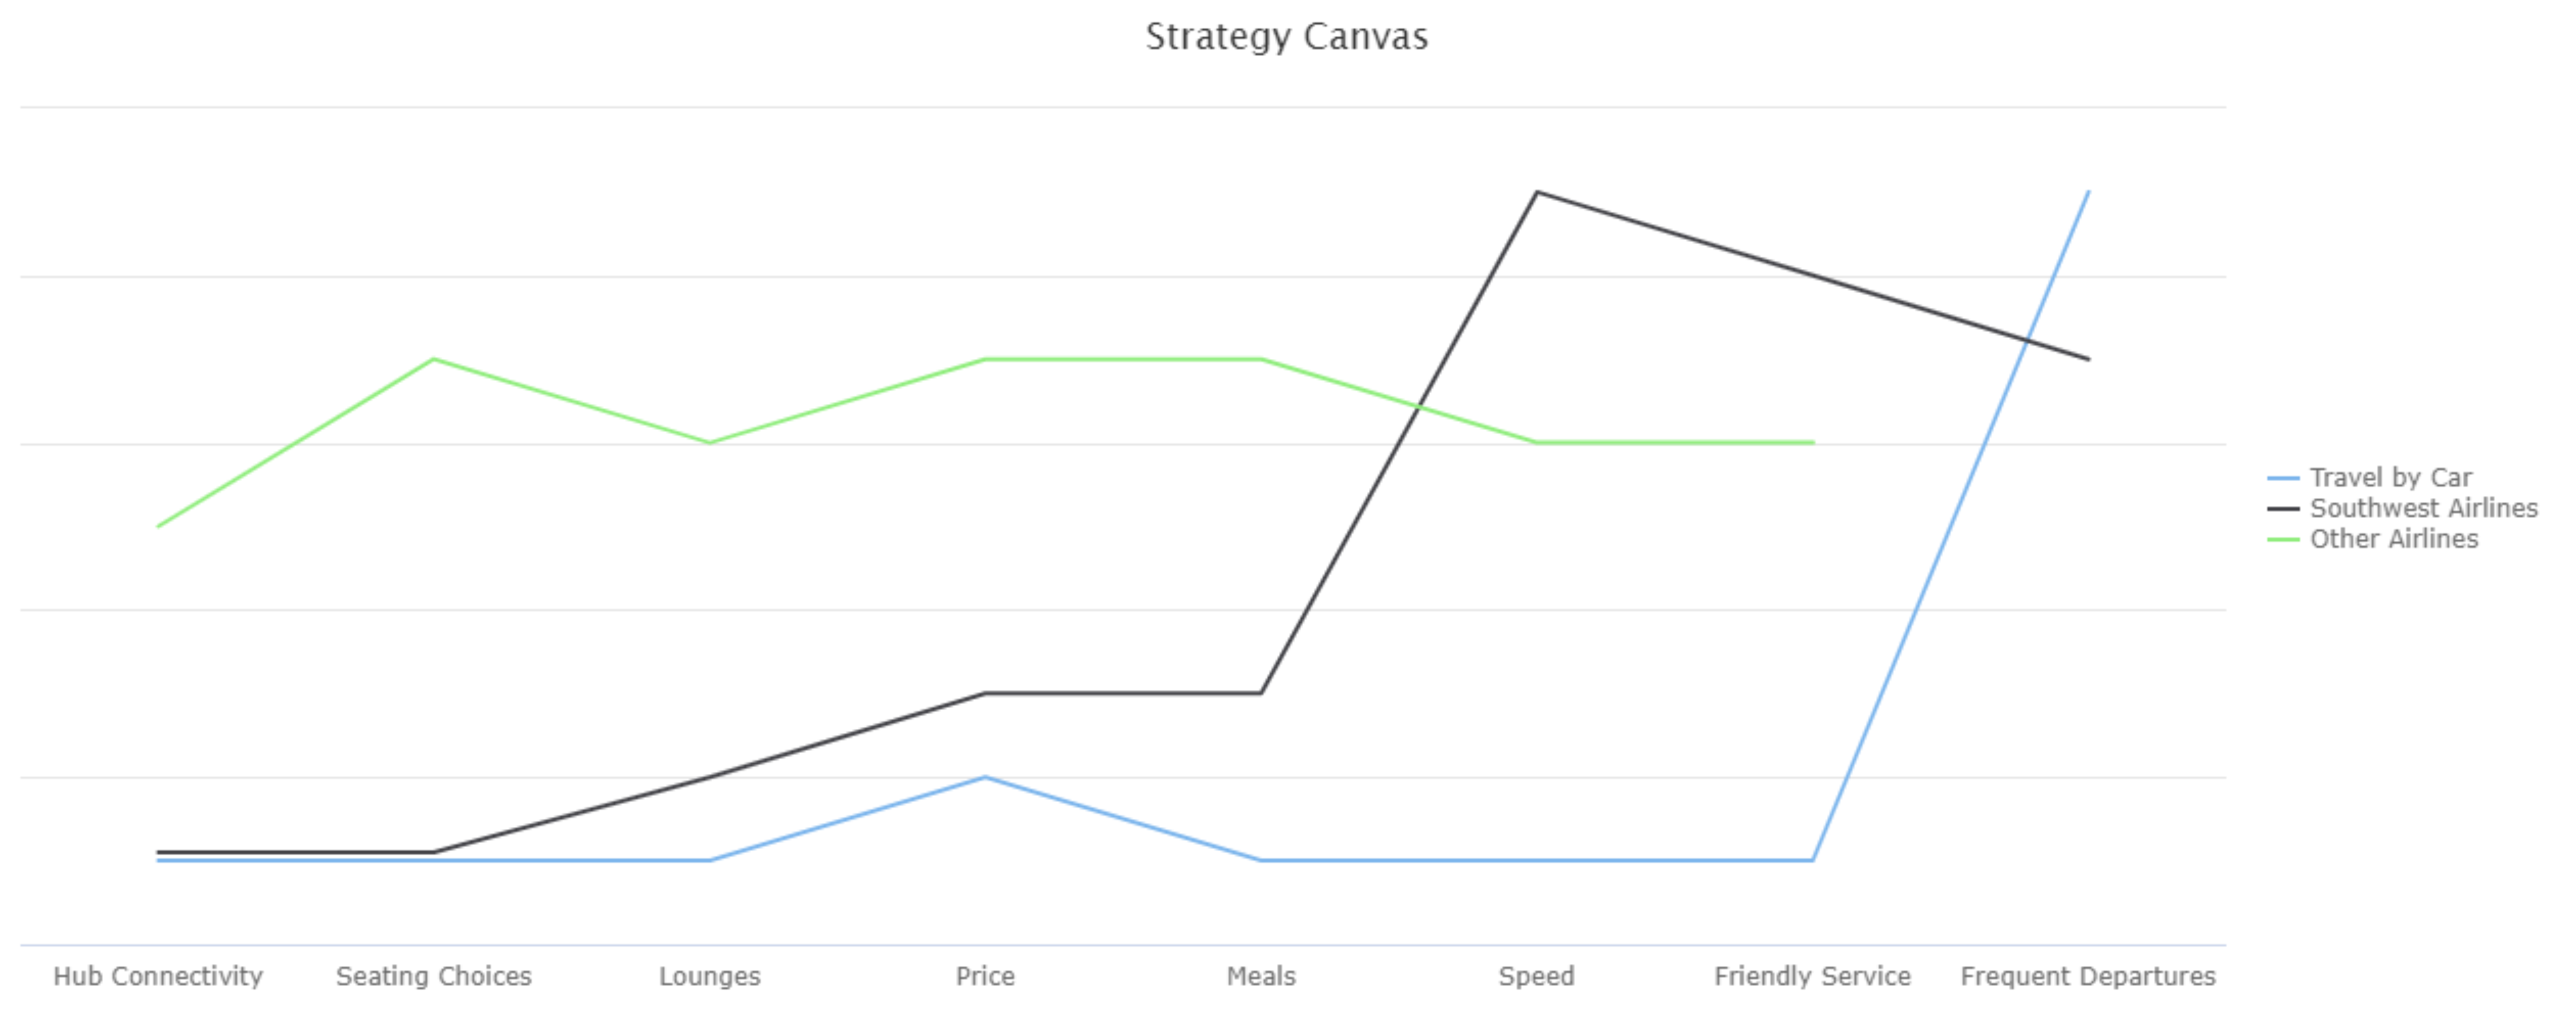 Southwest Airlines Strategy Canvas